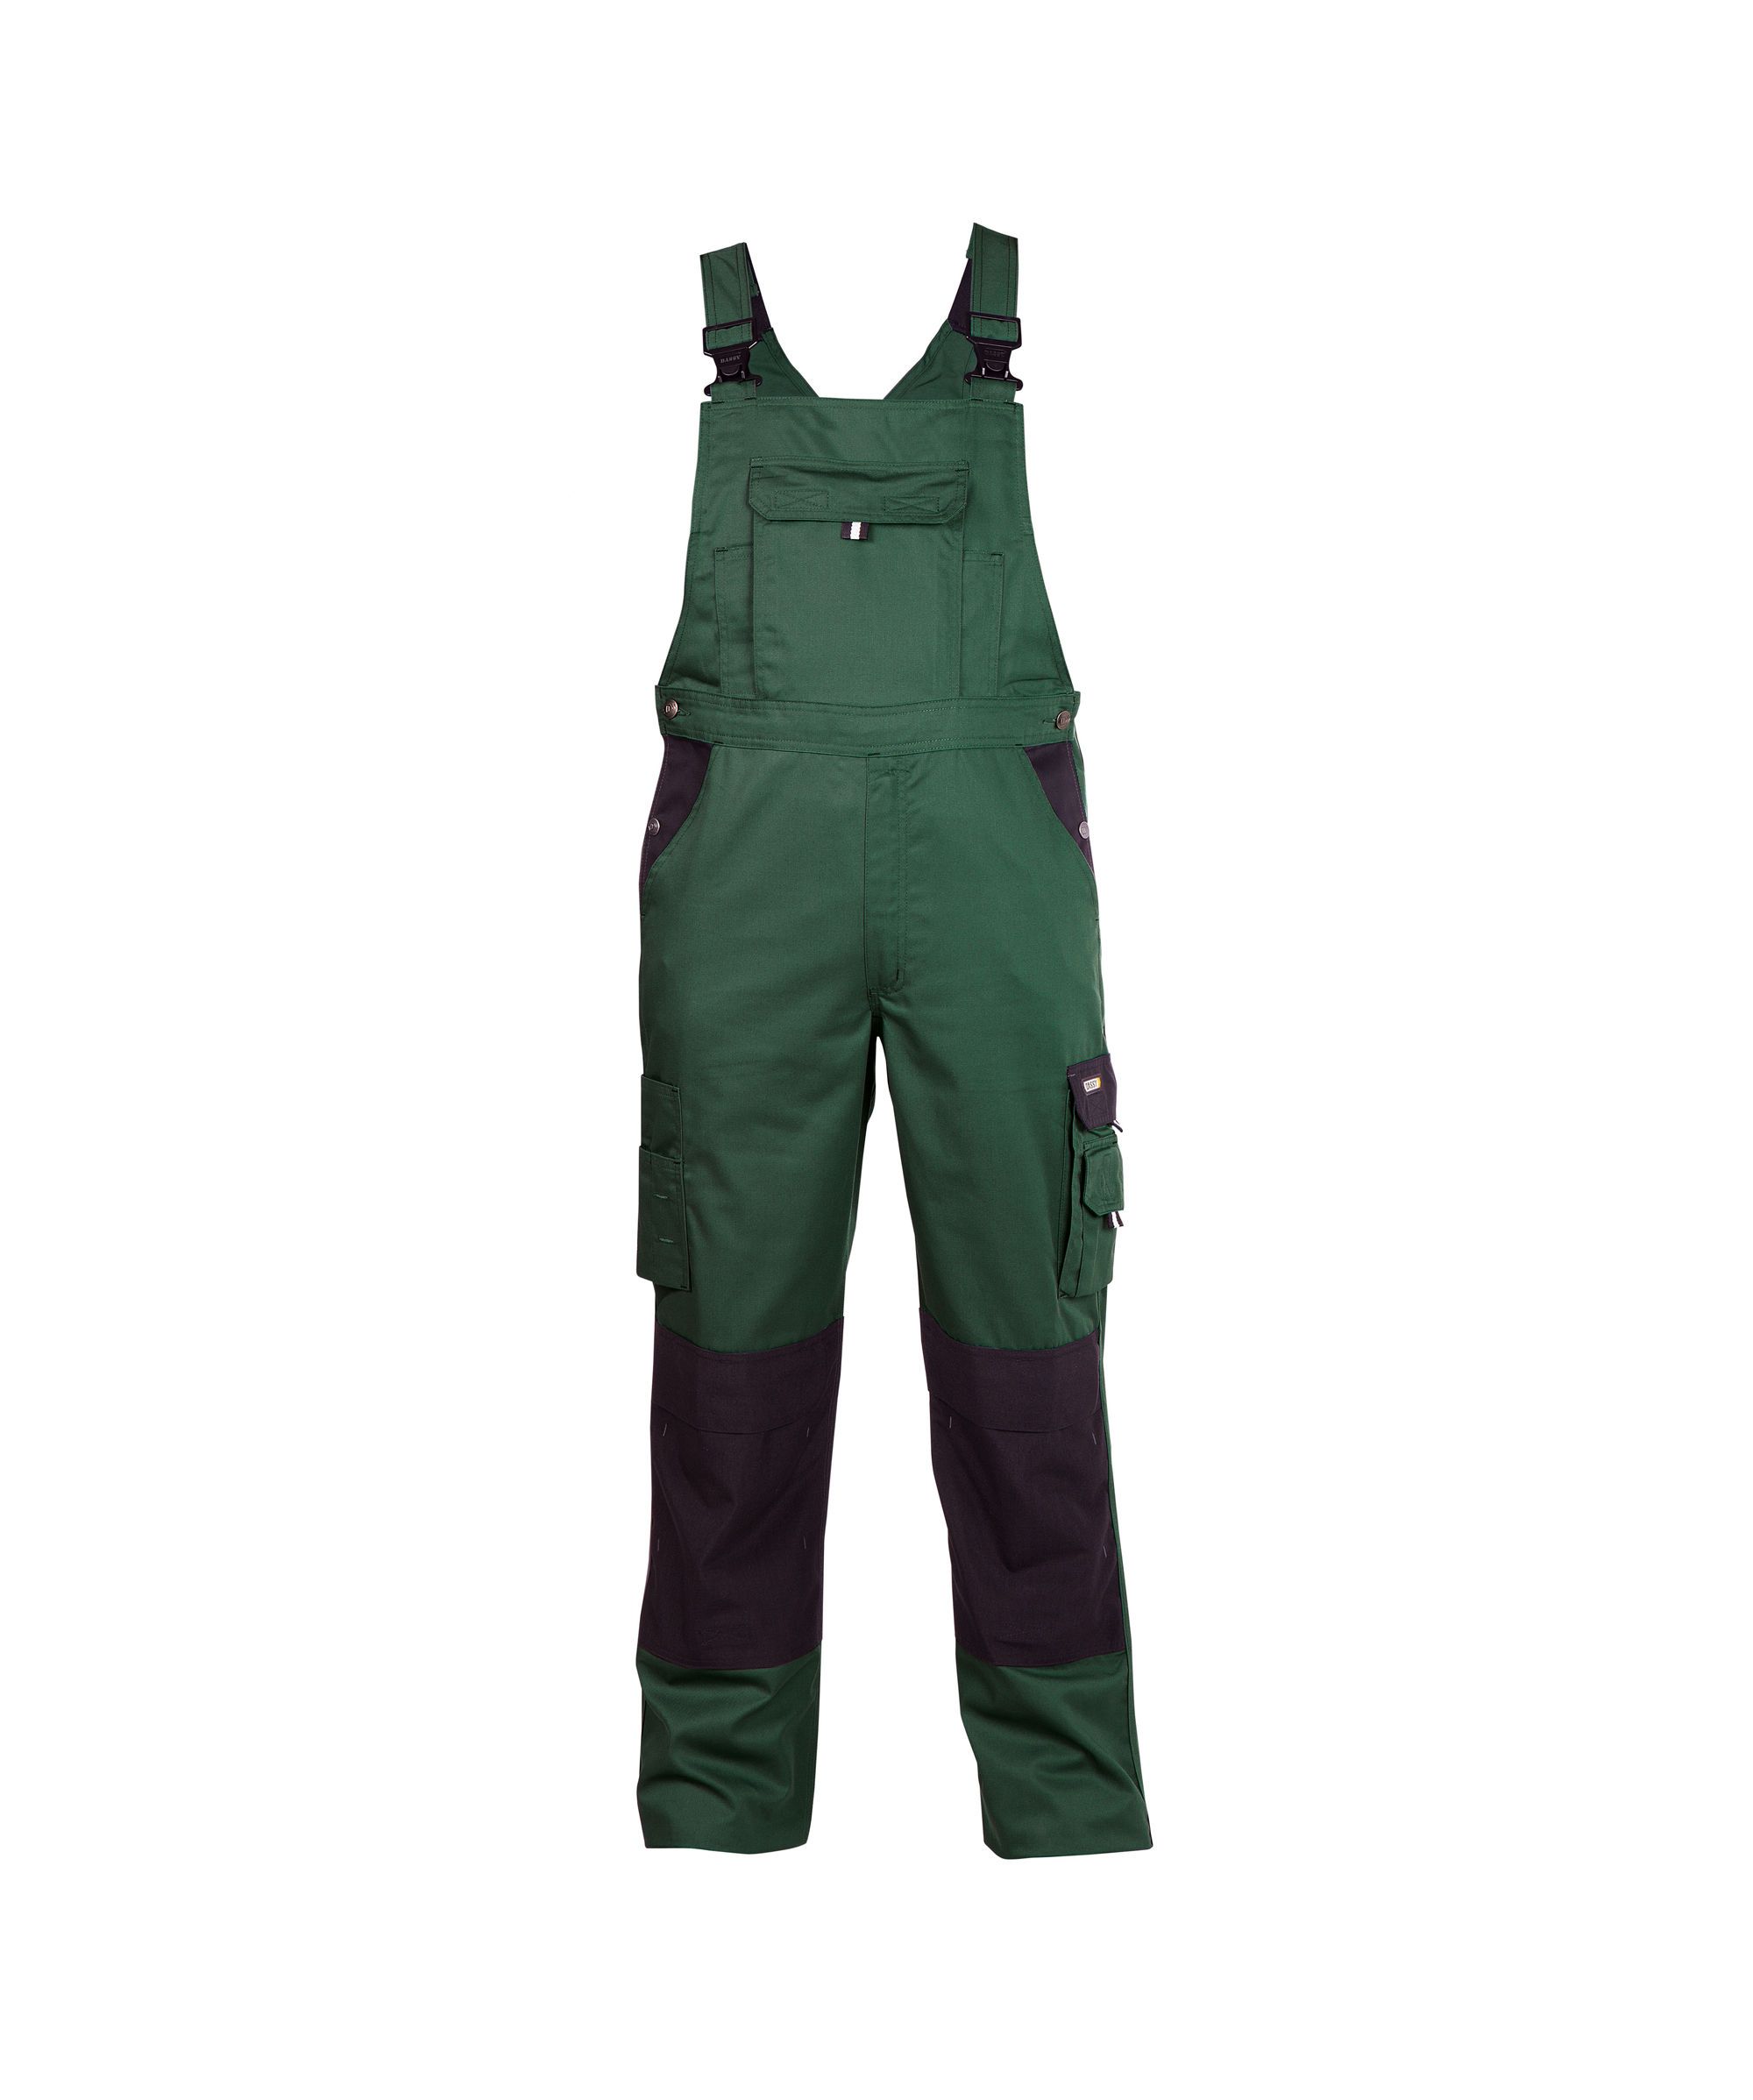 versailles_two-tone-brace-overall-with-knee-pockets_bottle-green-black_front.jpg